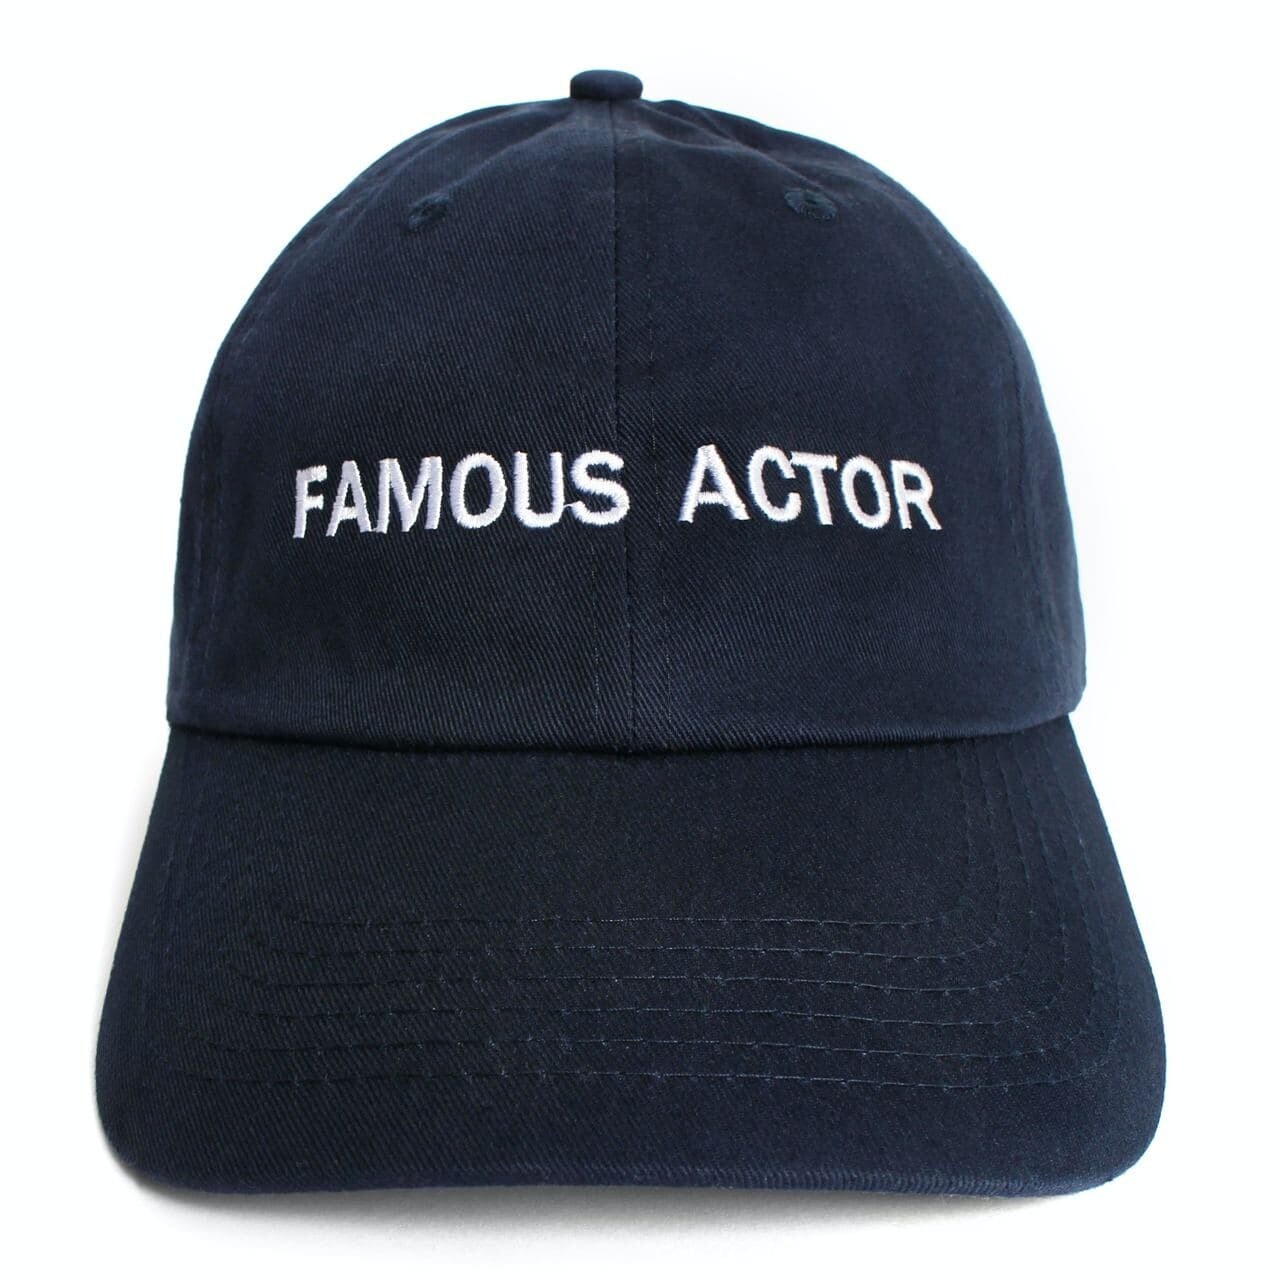 FAMOUS ACTOR Hat NAVY